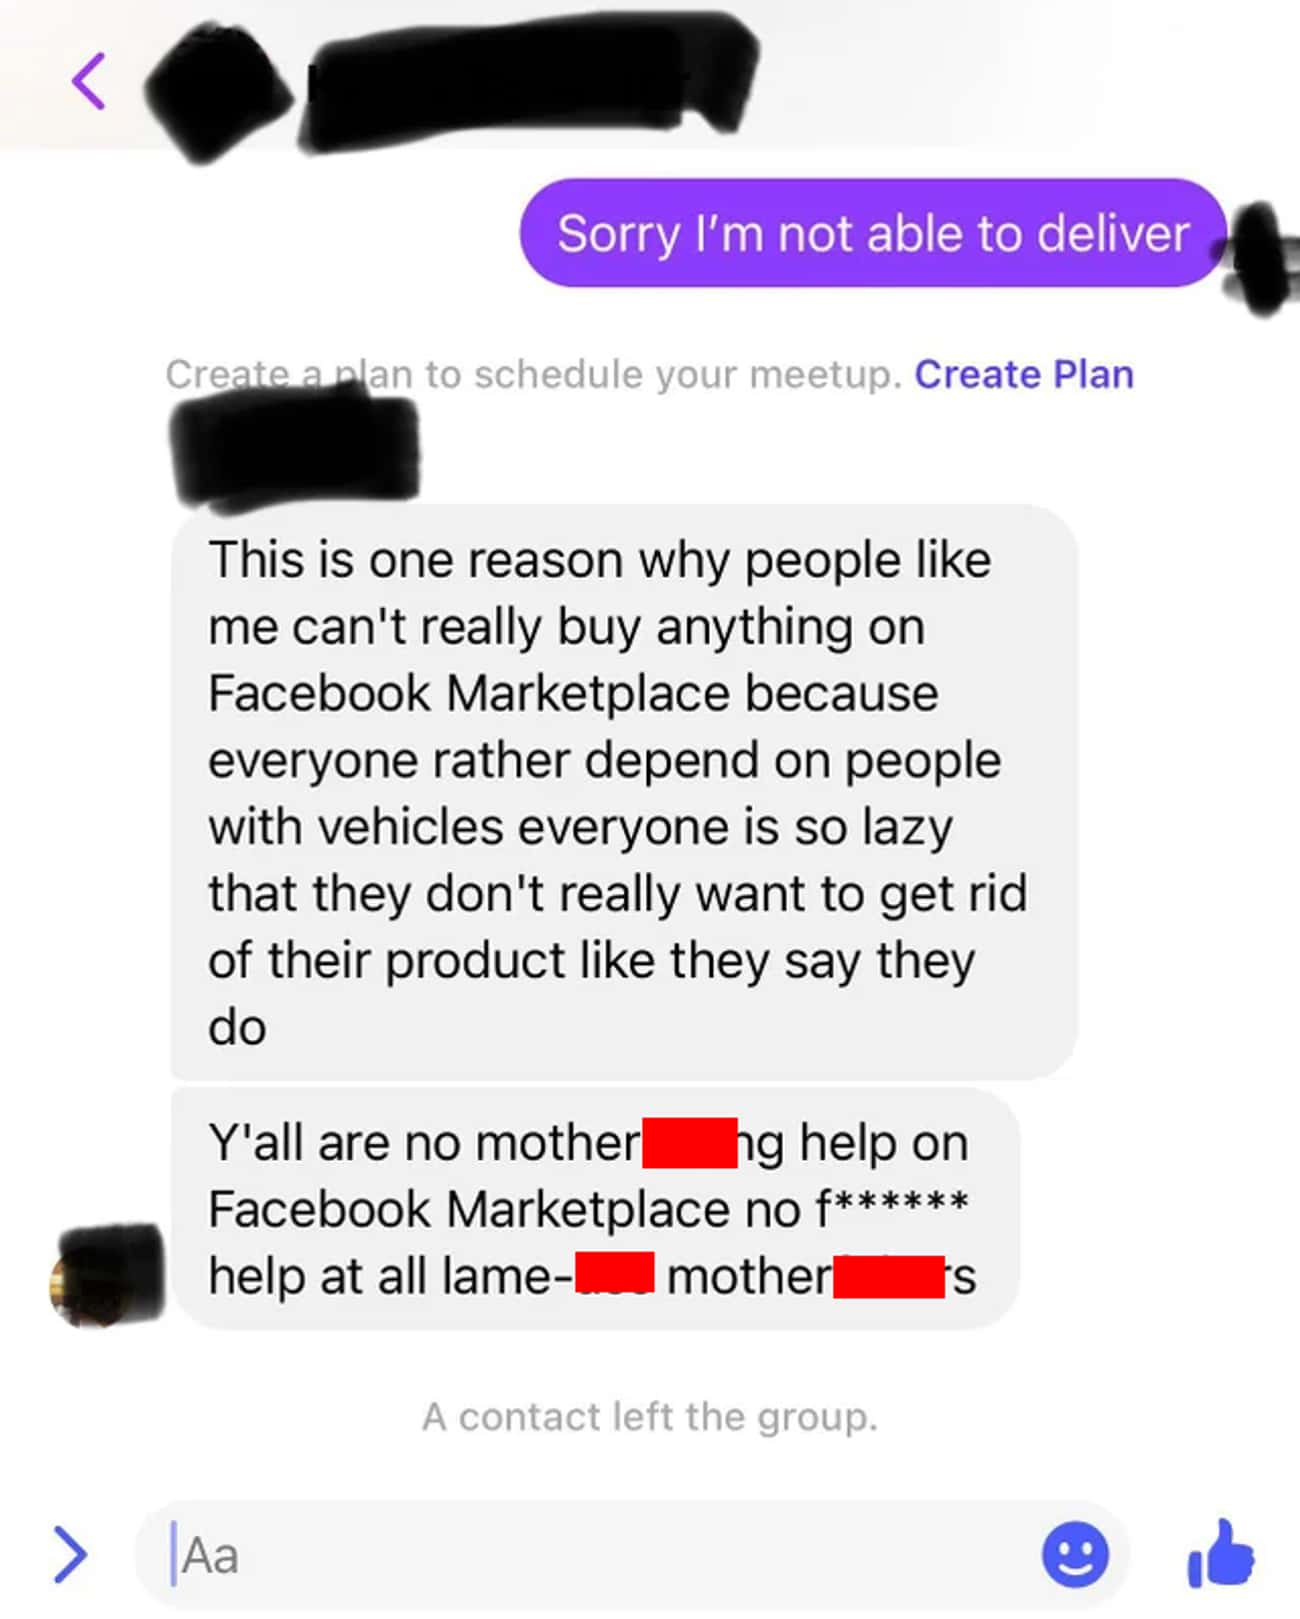 Choosing Beggar Doesn't Want To Pick Up Product And Wants It Delivered, Calls Seller "Lazy" 